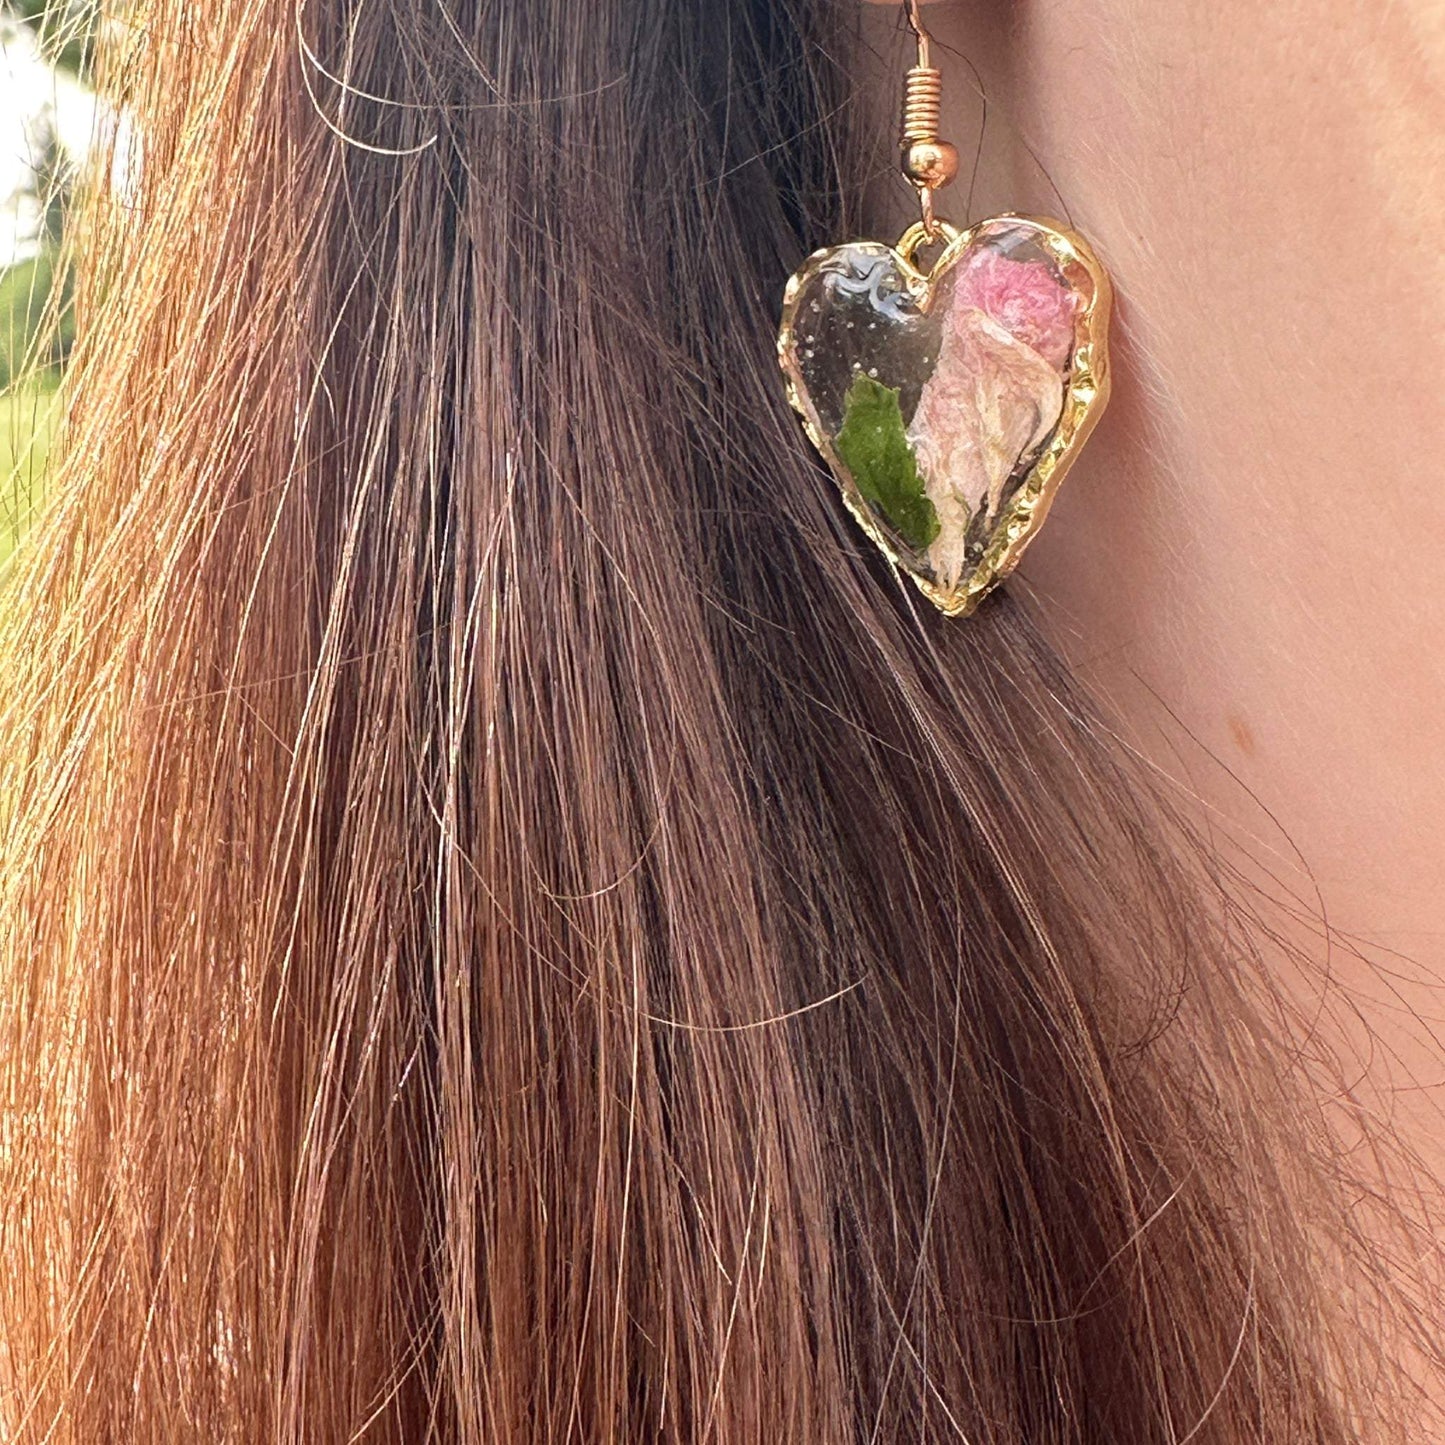 Heart Shaped Golden Flower Romantic Earring Set - Handmade with Real Dried Flowers